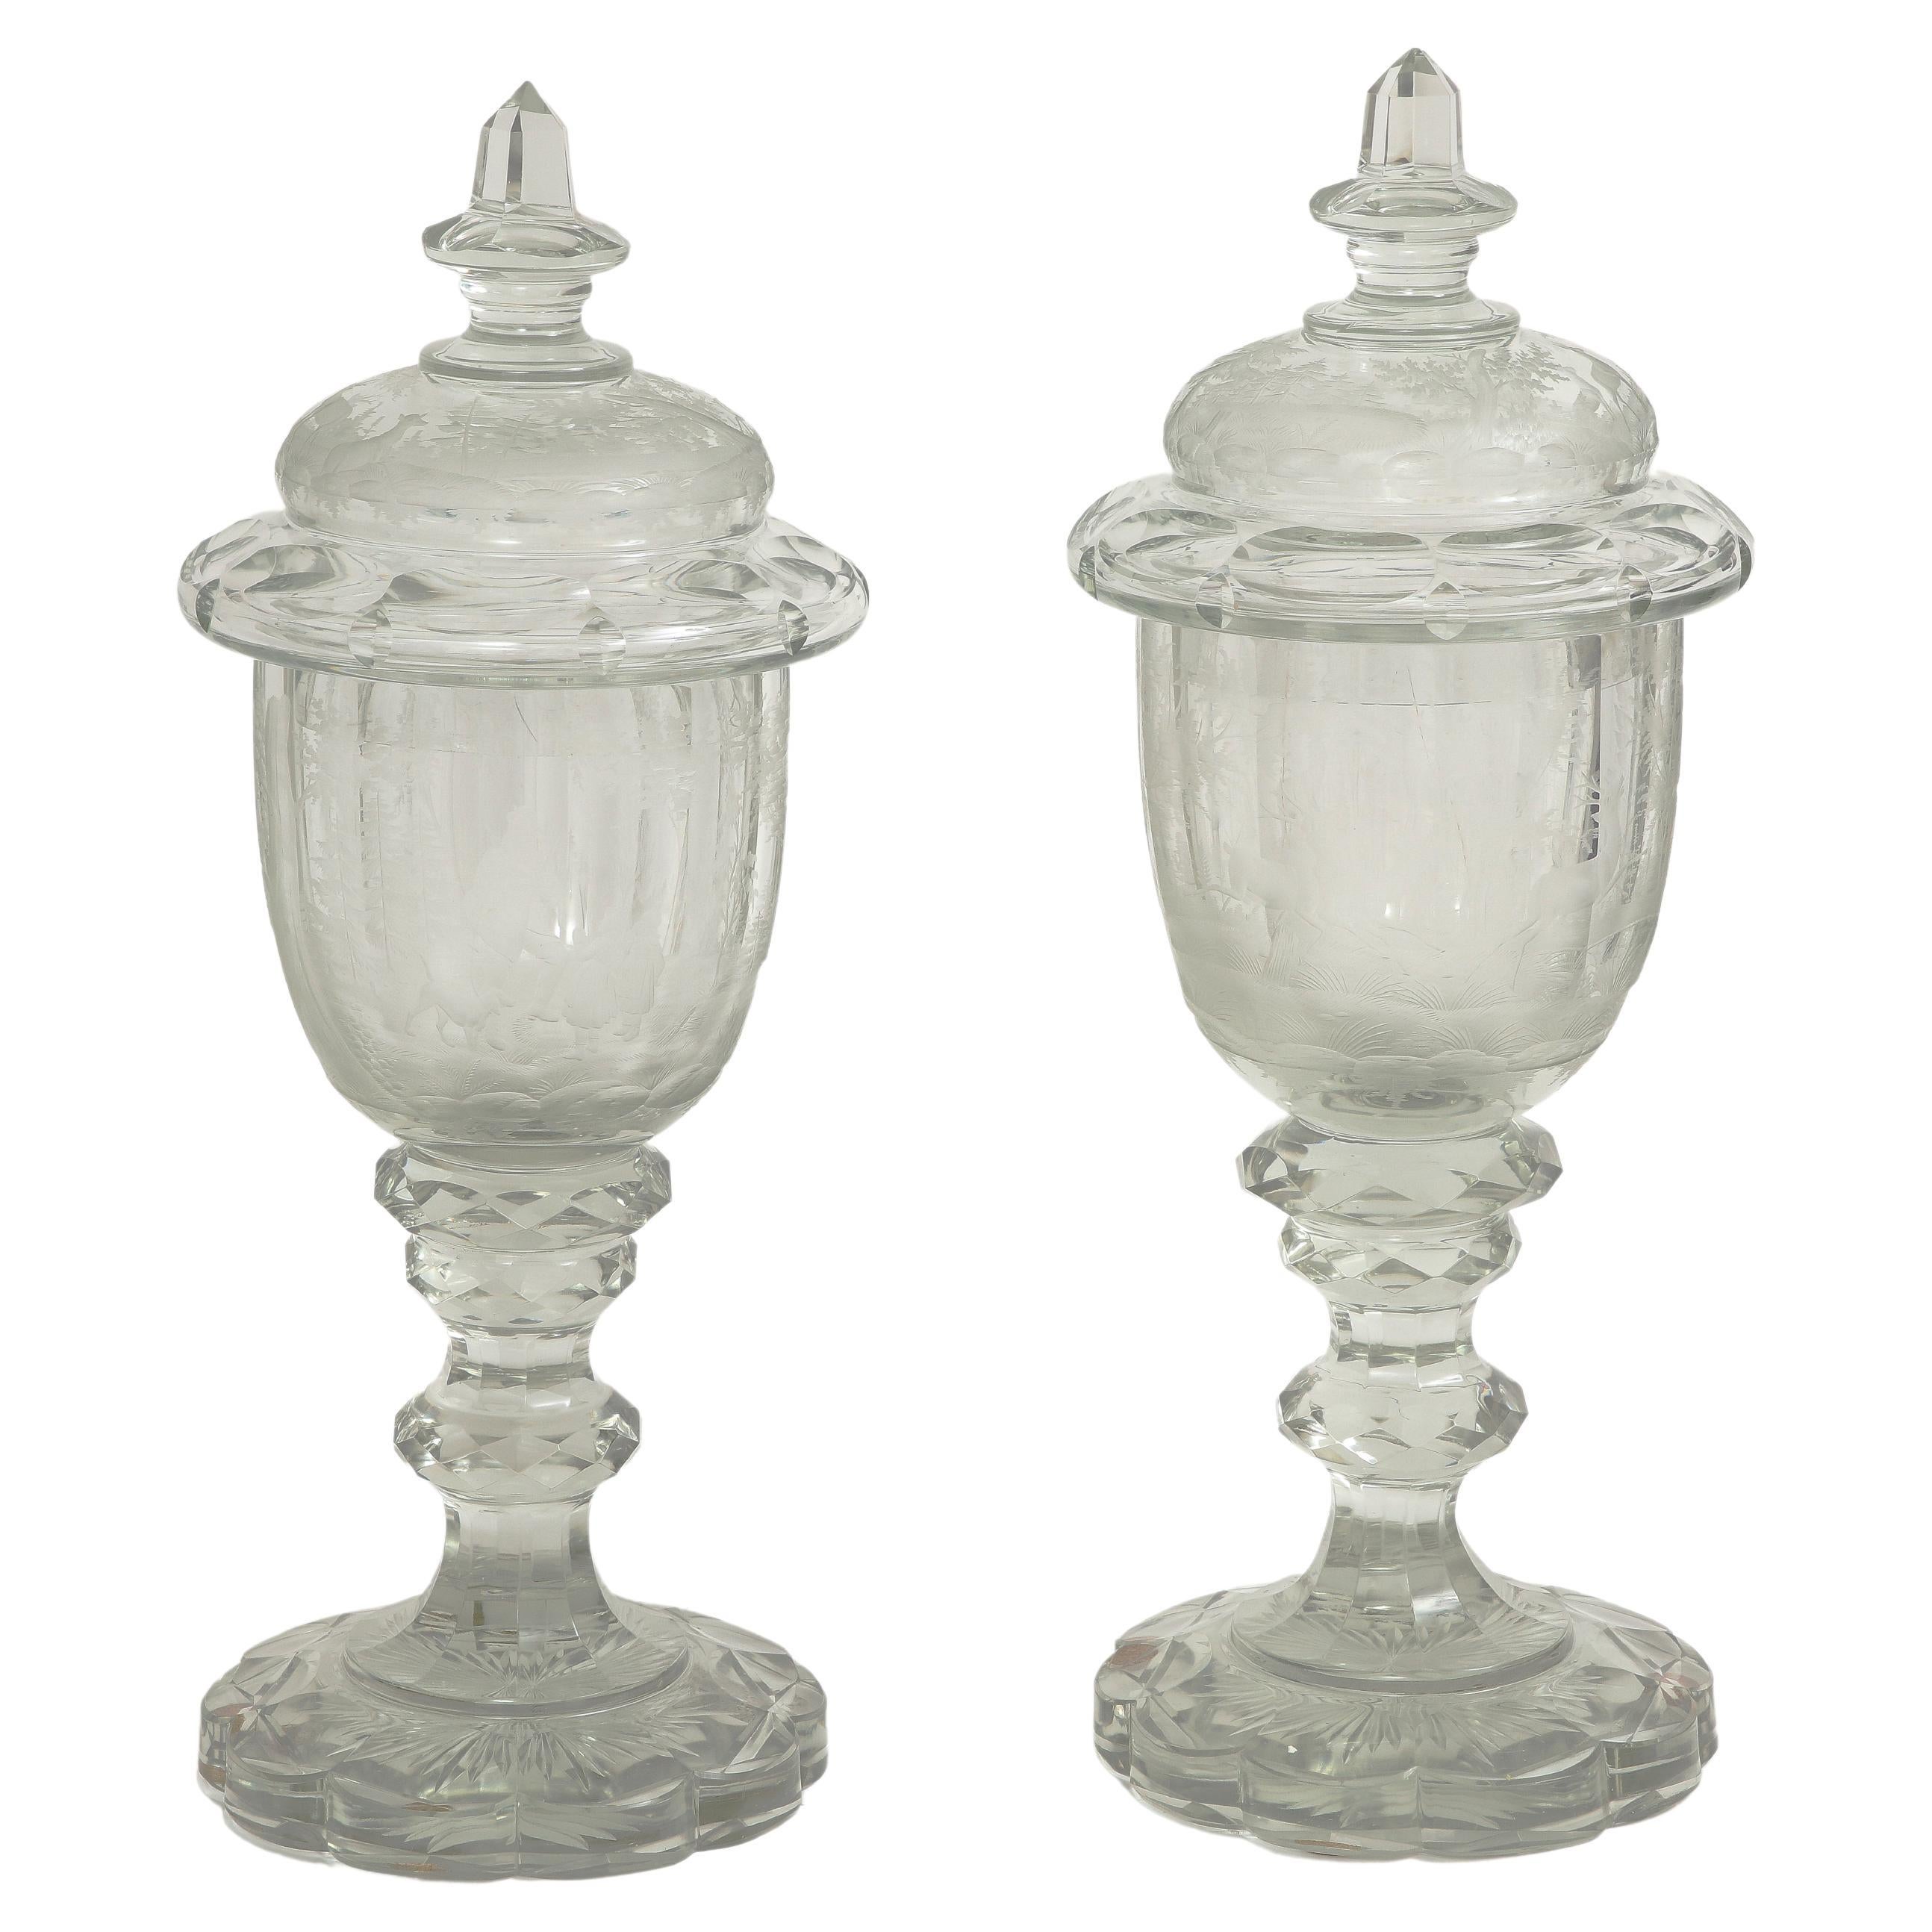 Pair of 19th C. Bohemian Crystal Hand-Engraved and Acid Washed Covered Pokals For Sale